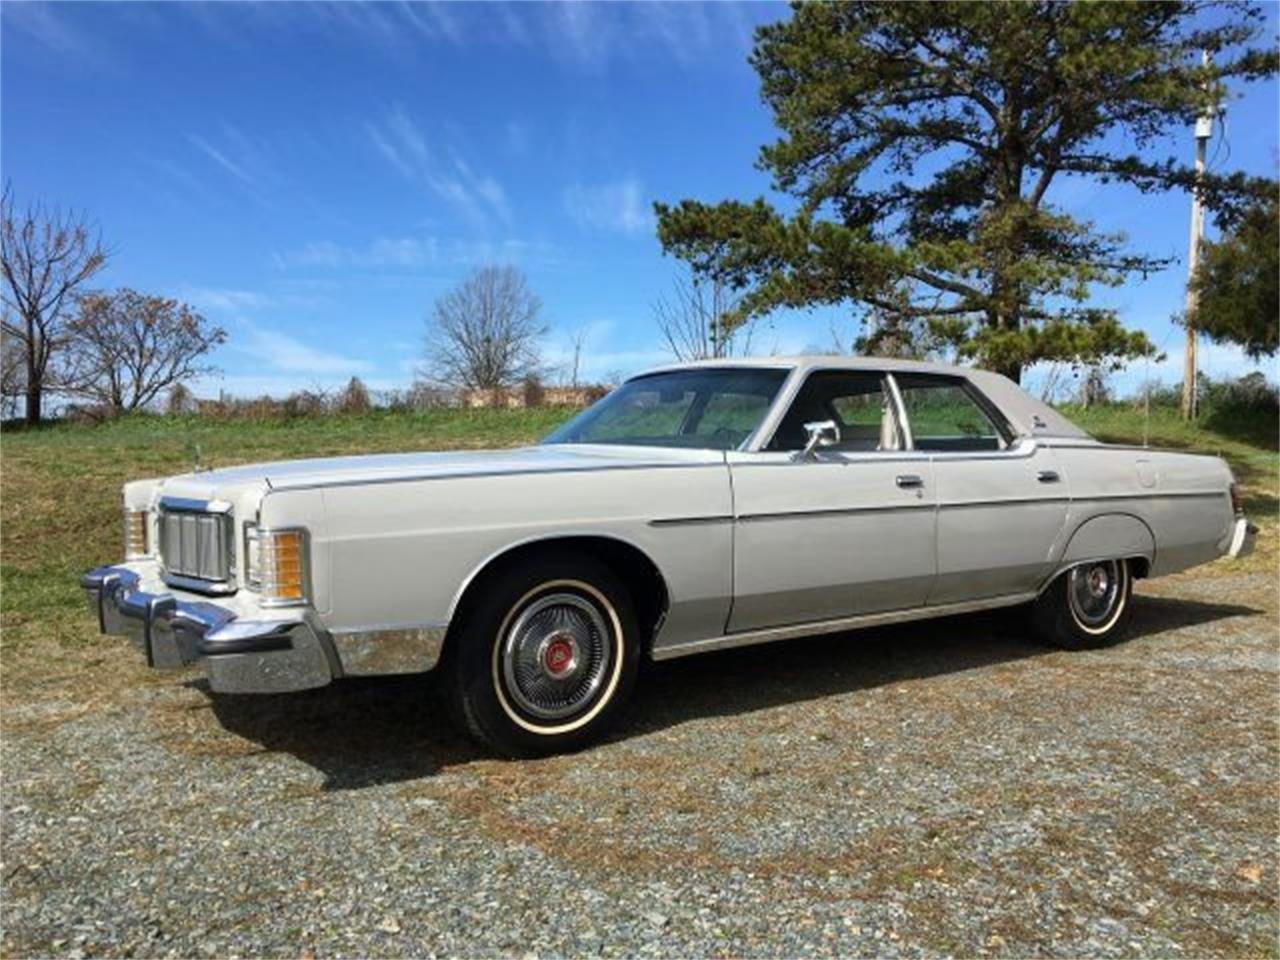 For Sale at Auction: 1977 Mercury Marquis in Raleigh, North Carolina.